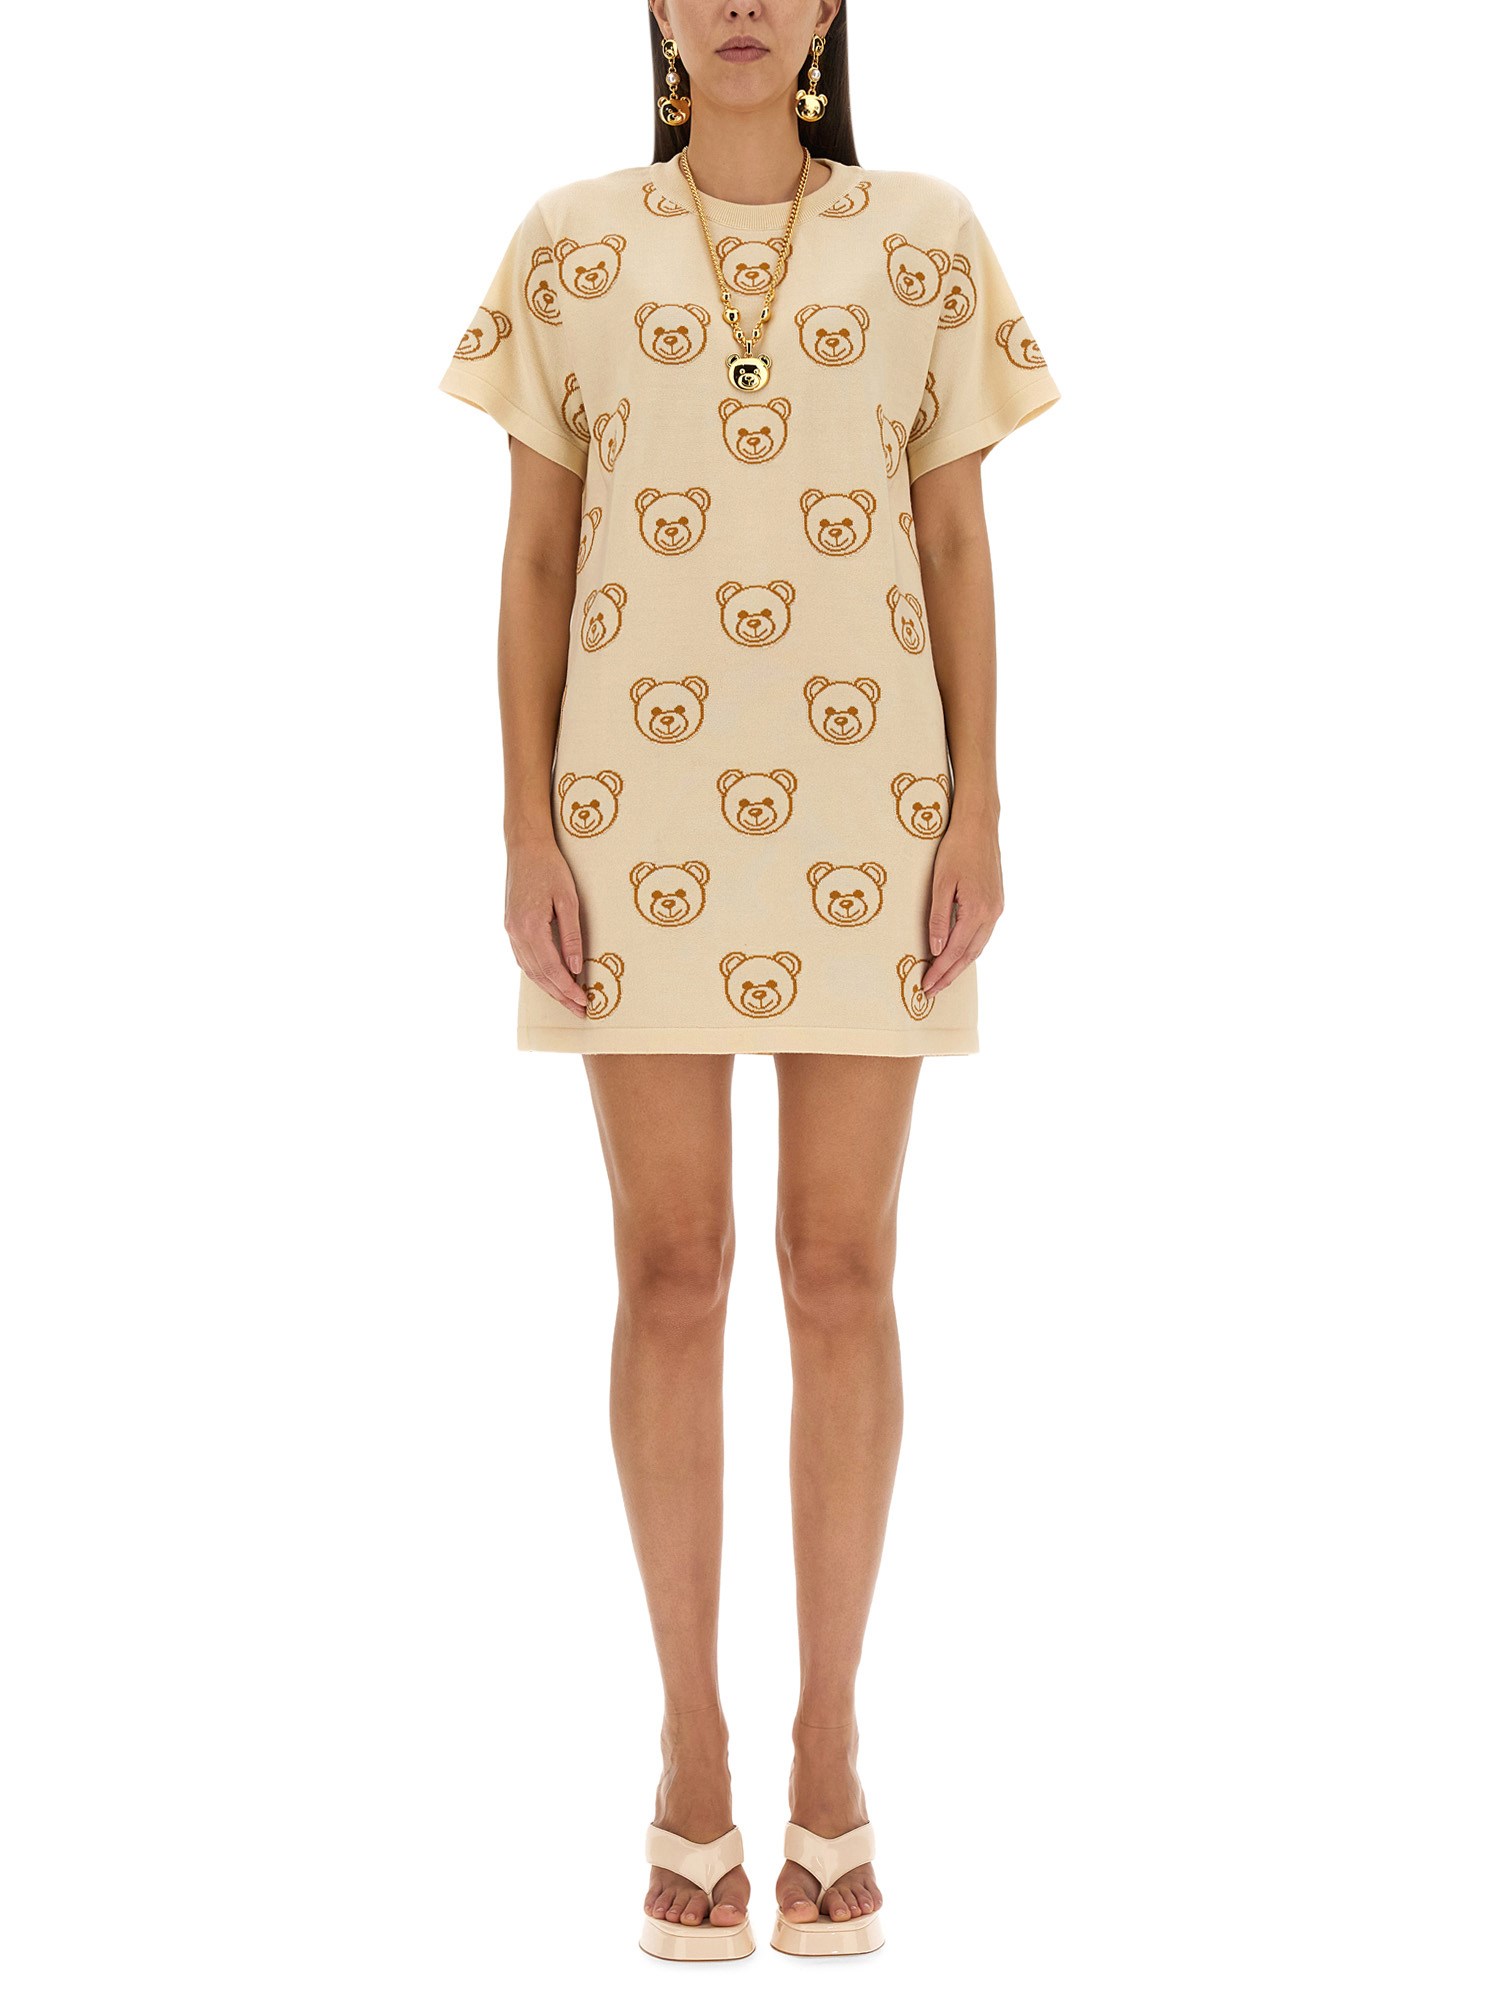 moschino dress with teddy bear embroidery